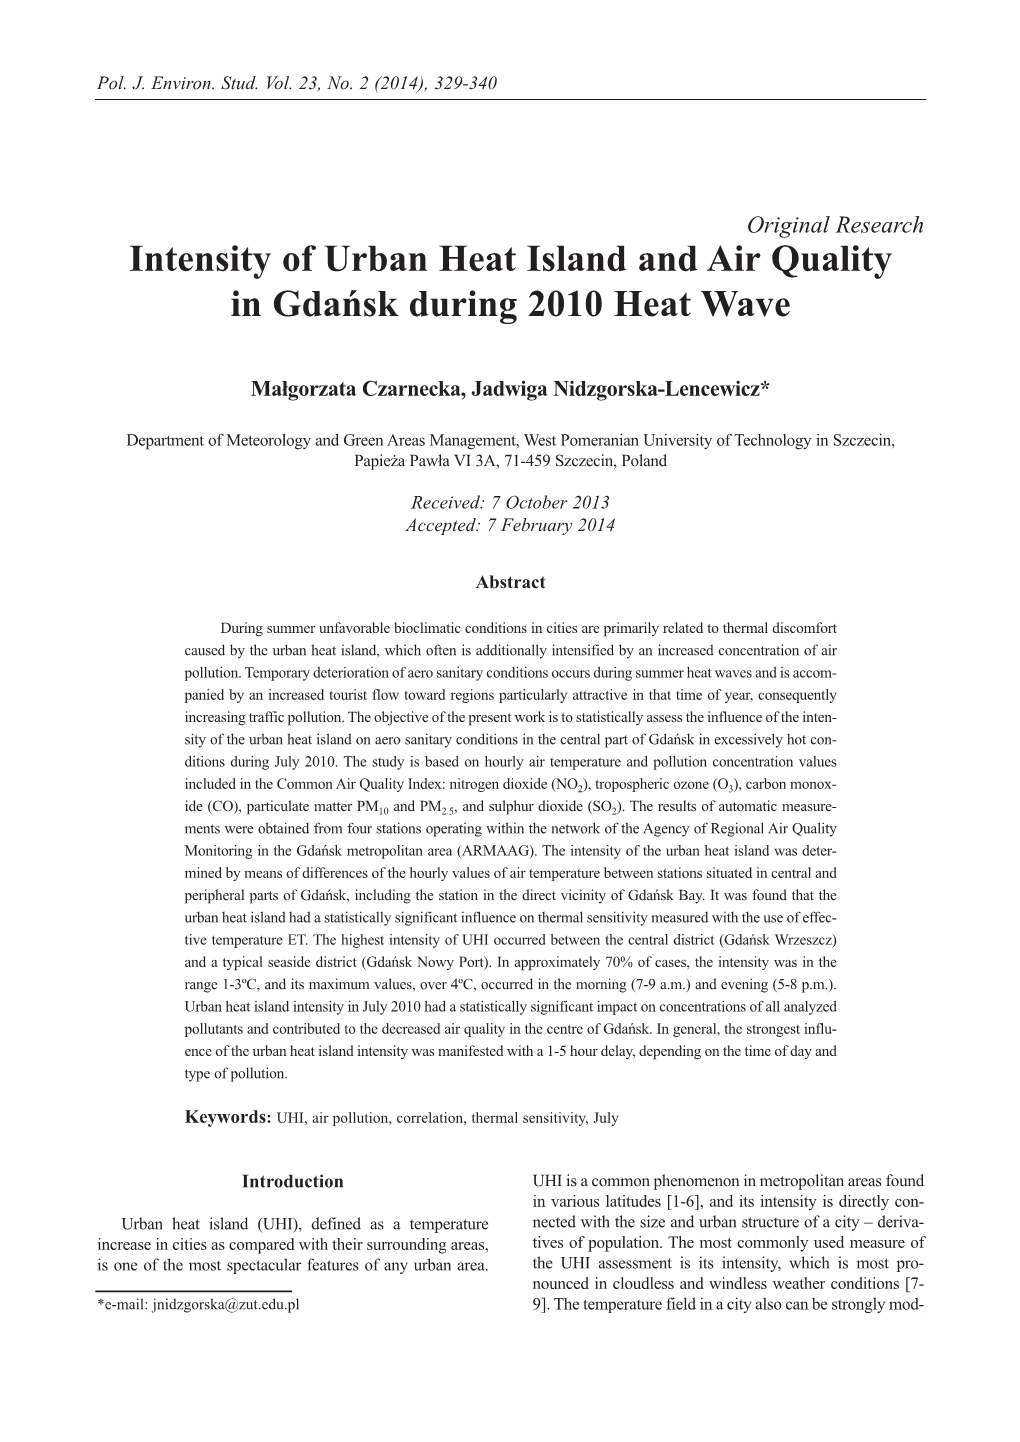 Intensity of Urban Heat Island and Air Quality in Gdańsk During 2010 Heat Wave